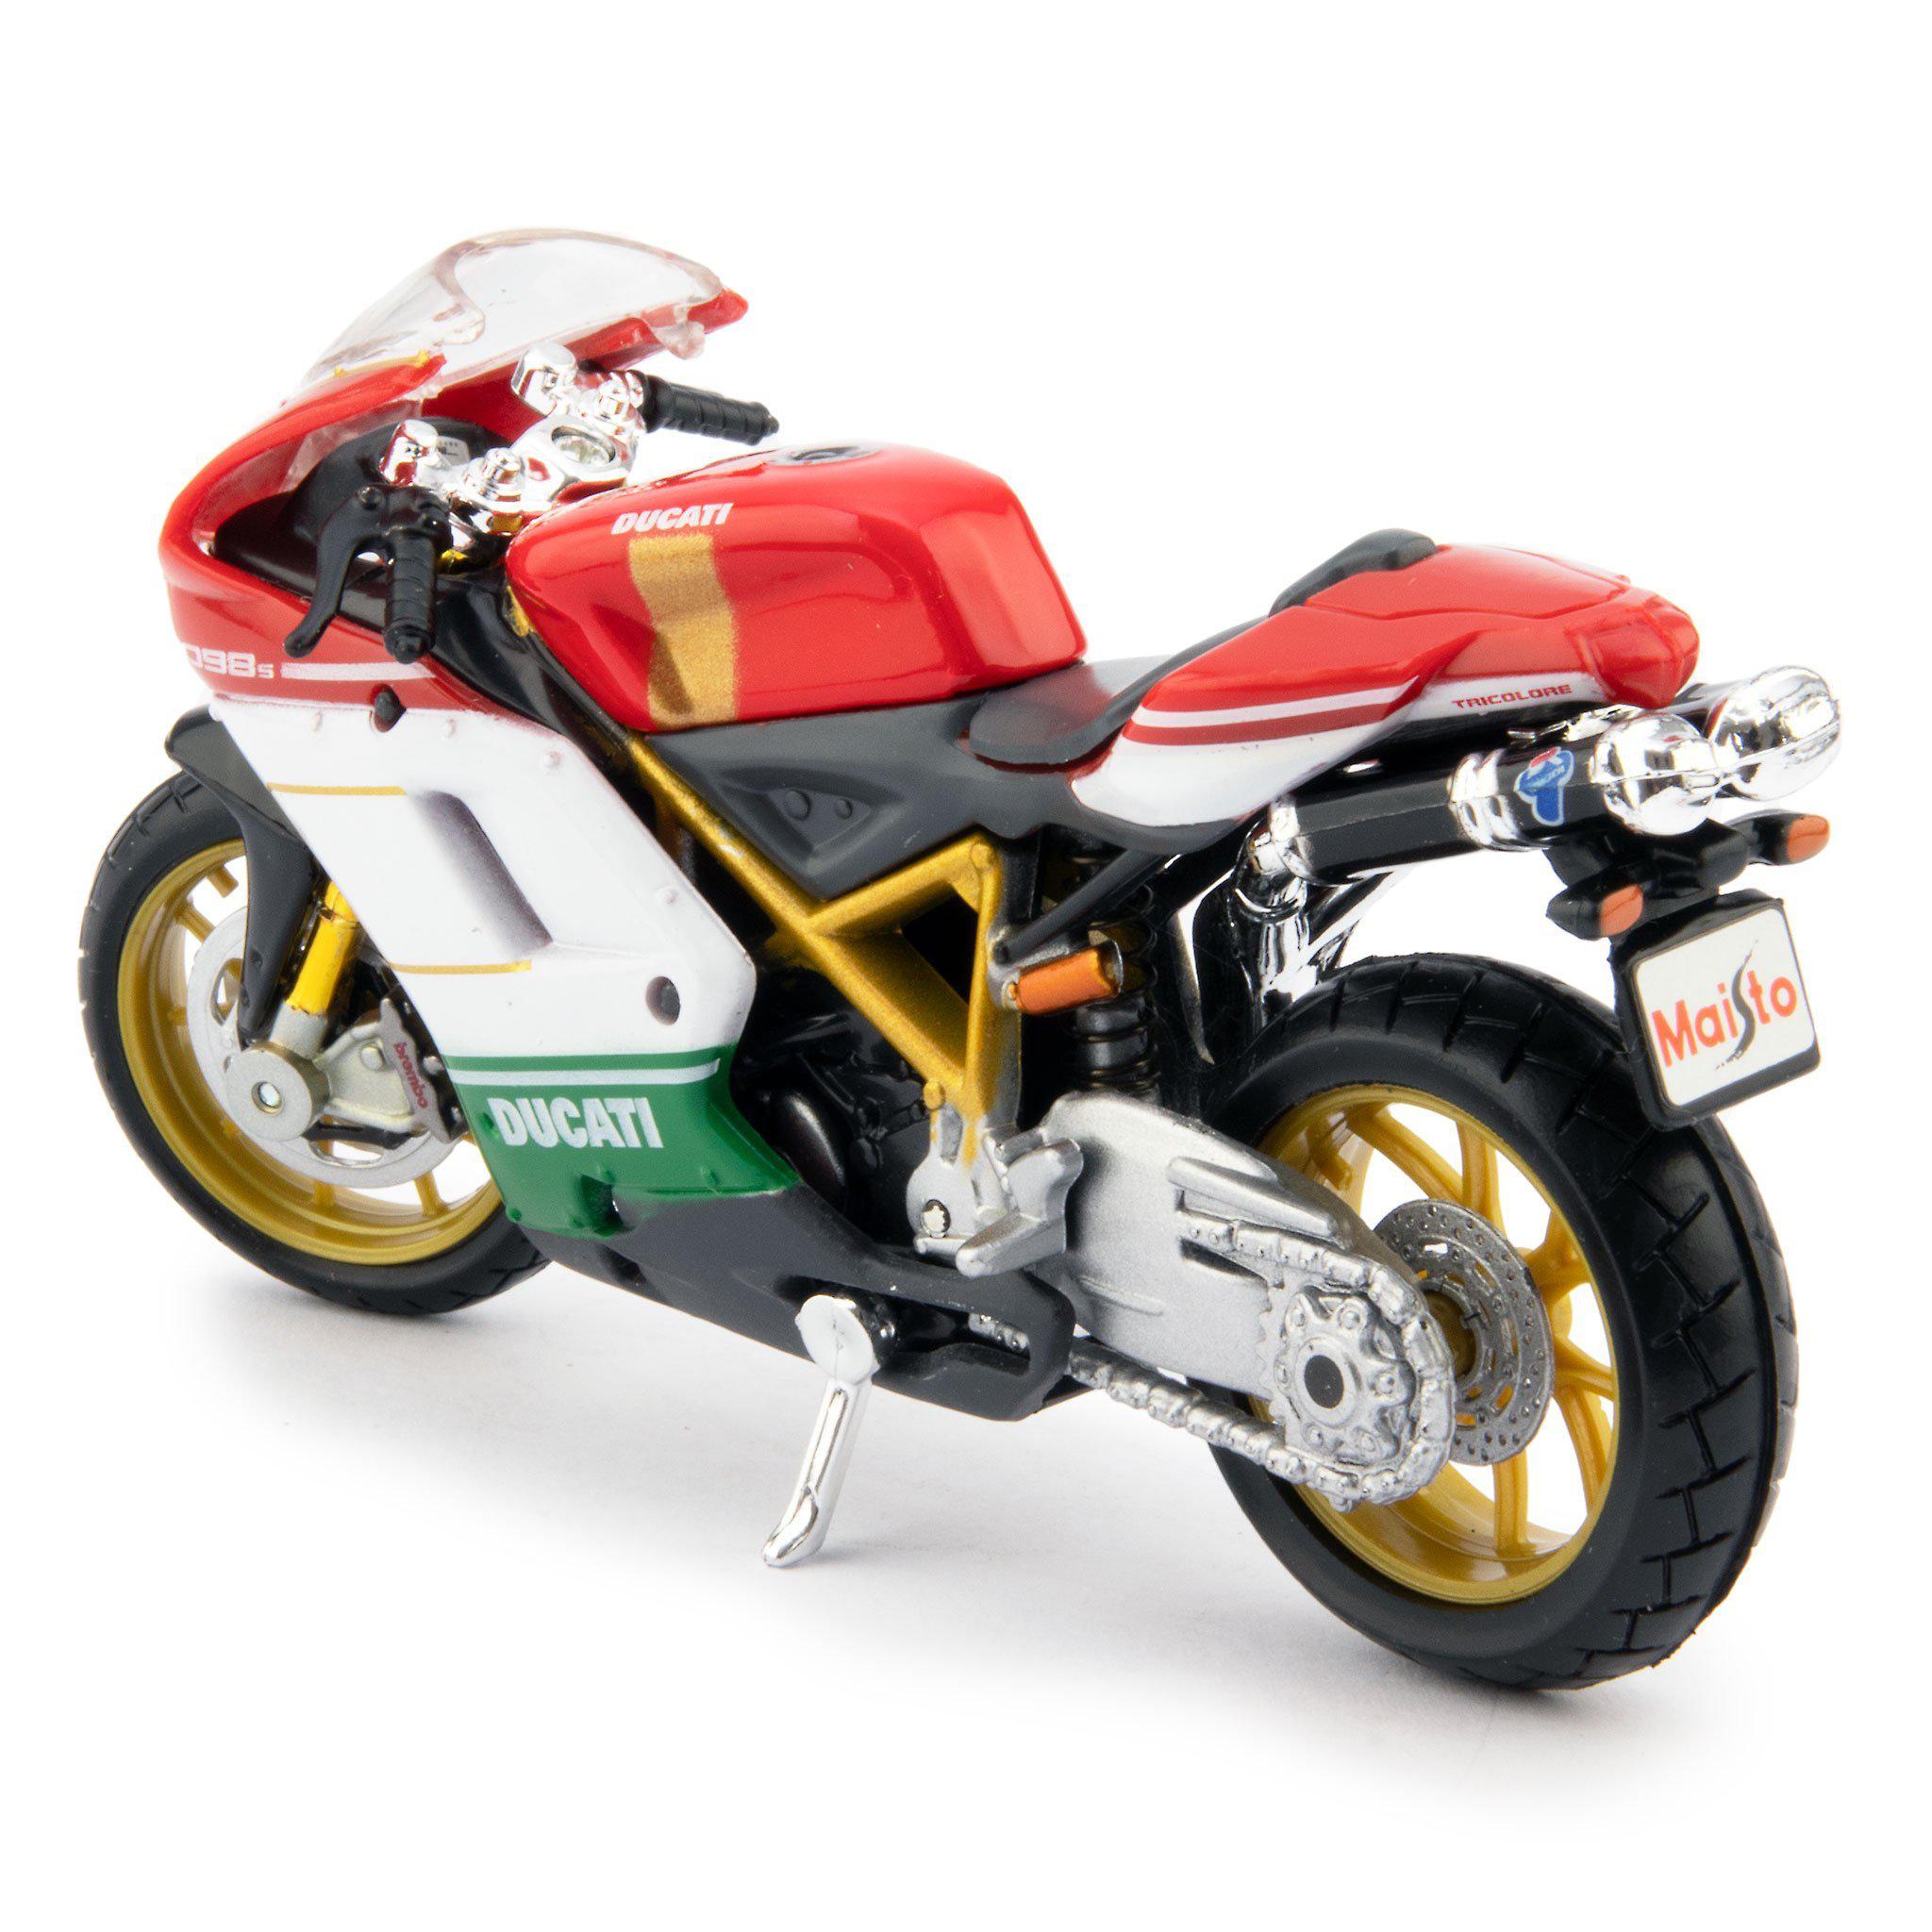 Ducati 1098 S Diecast Model Motorcycle red/white/green - 1:18 scale-Maisto-Diecast Model Centre